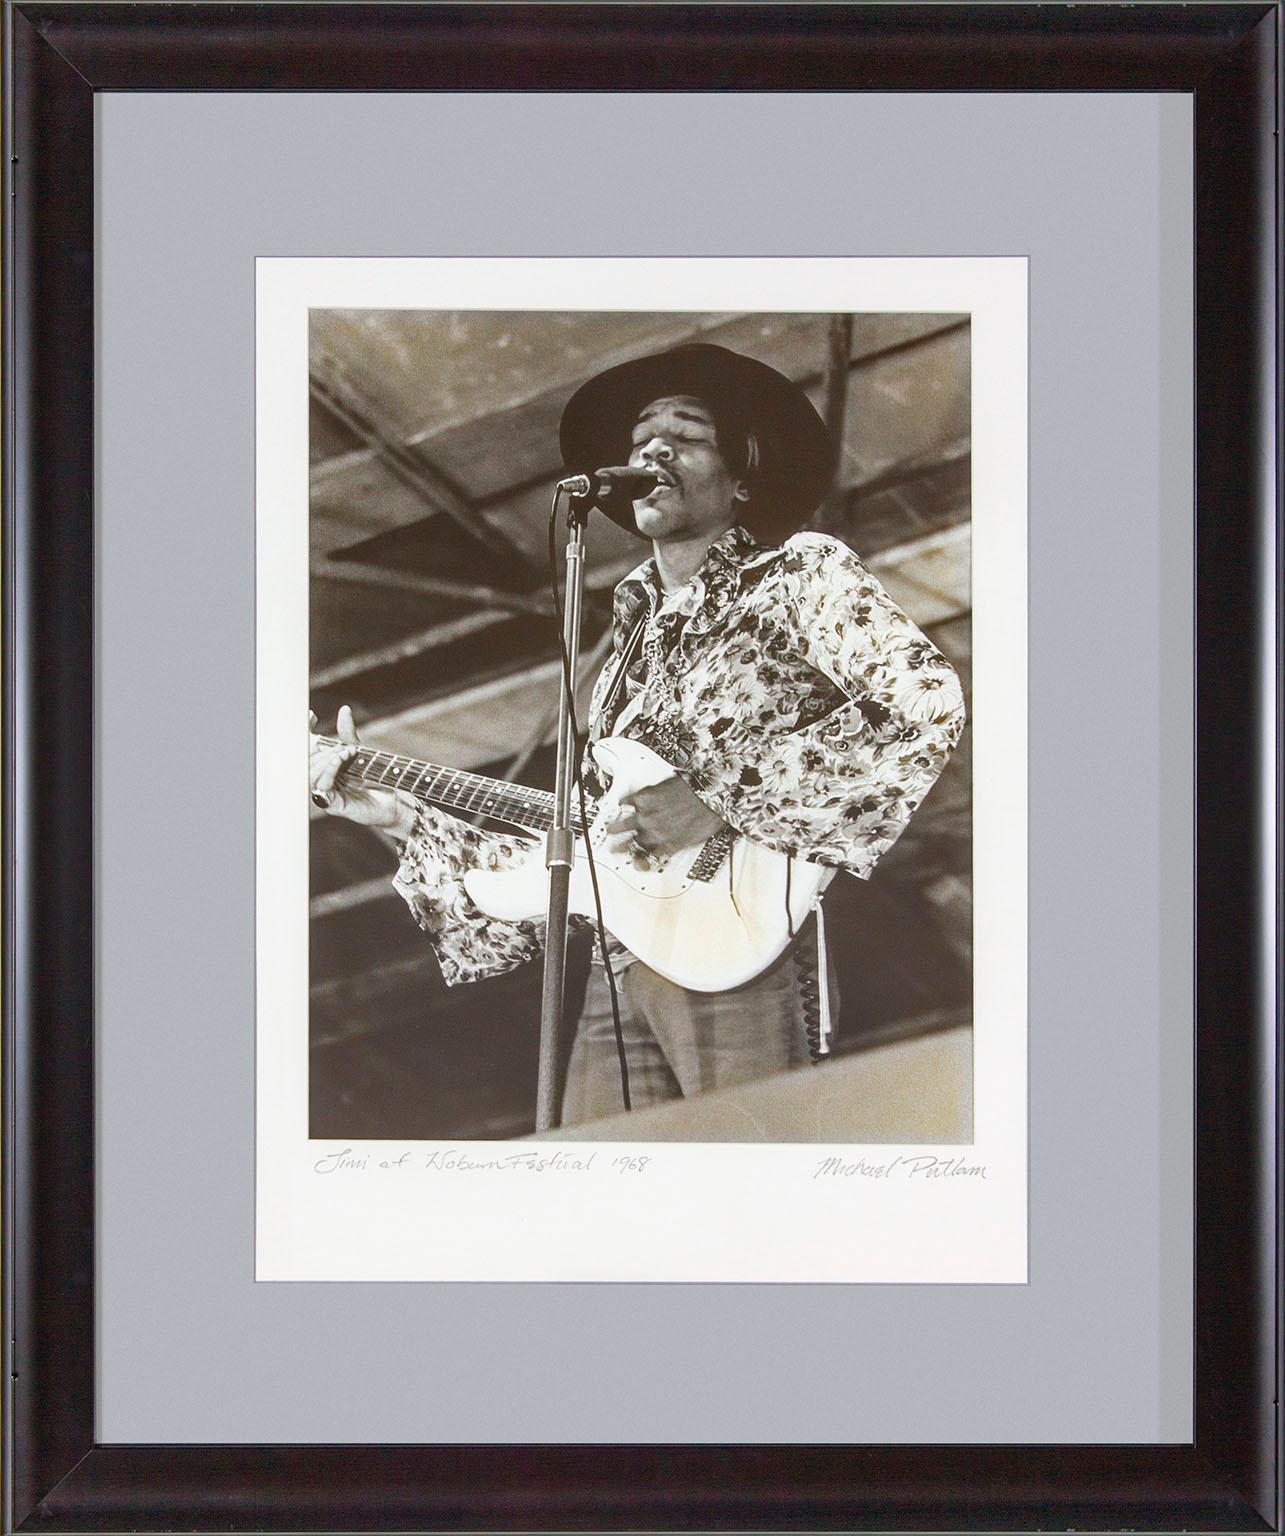 "Jimi at Woburn Festival 1968" framed black and white photograph by Michael Putland of Jimi Hendrix at the July 6, 1968, Woburn Music Festival in England.  "Jimi at Woburn Festival 1968" hand written on front lower left corner. "Michael Putland"